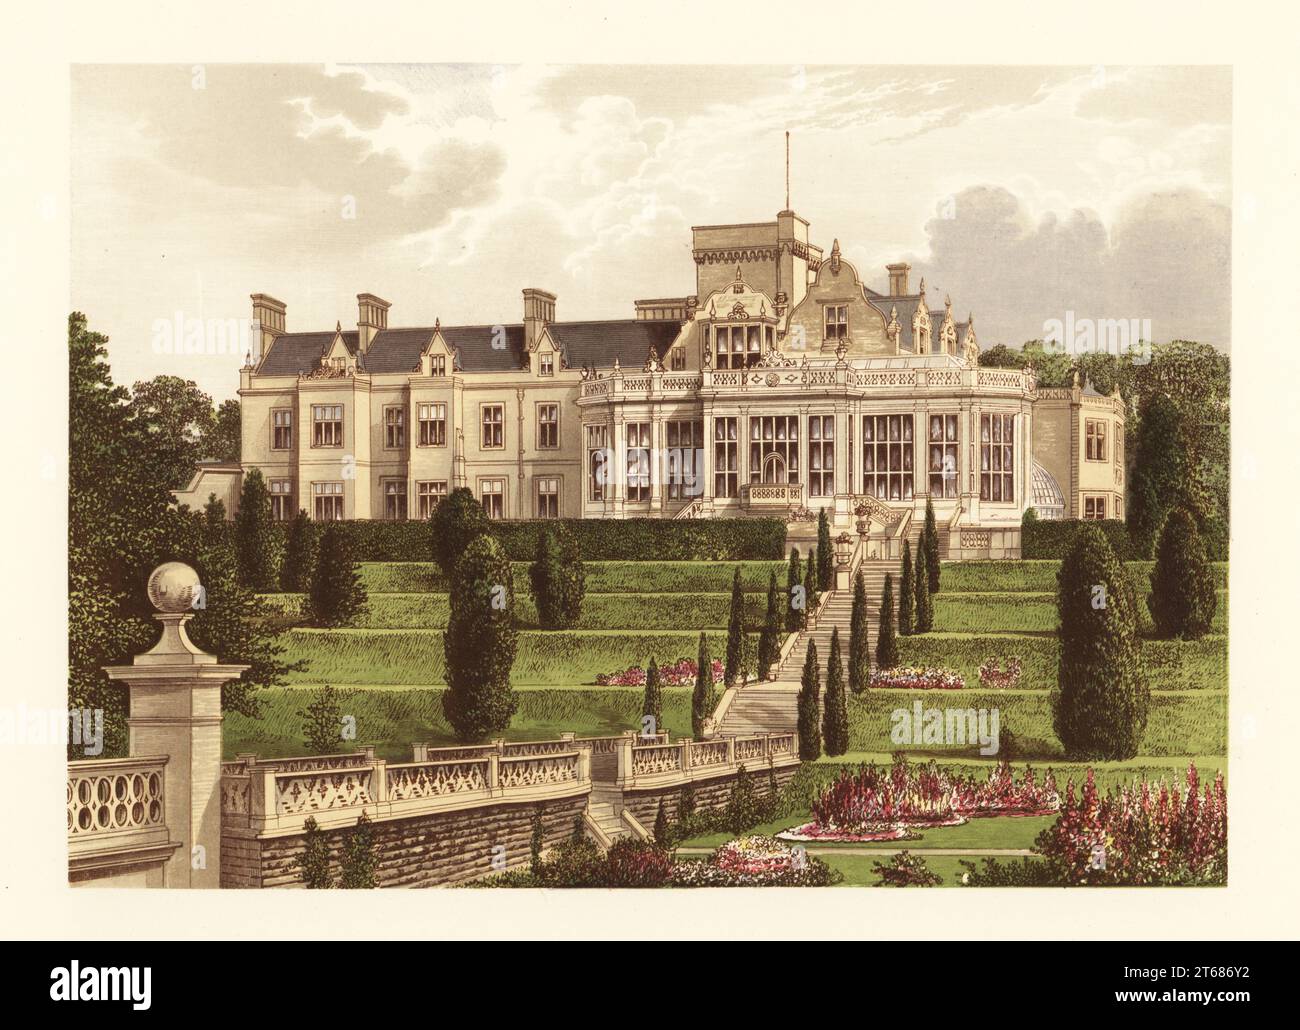 Easton Hall, Lincolnshire, England. Elizabethan mansion with walled gardens renovated in the mid-19th century for Sir Montague Cholmeley, 1st Baronet. Colour woodblock by Benjamin Fawcett in the Baxter process of an illustration by Alexander Francis Lydon from Reverend Francis Orpen Morriss Picturesque Views of the Seats of Noblemen and Gentlemen of Great Britain and Ireland, William Mackenzie, London, 1880. Stock Photo